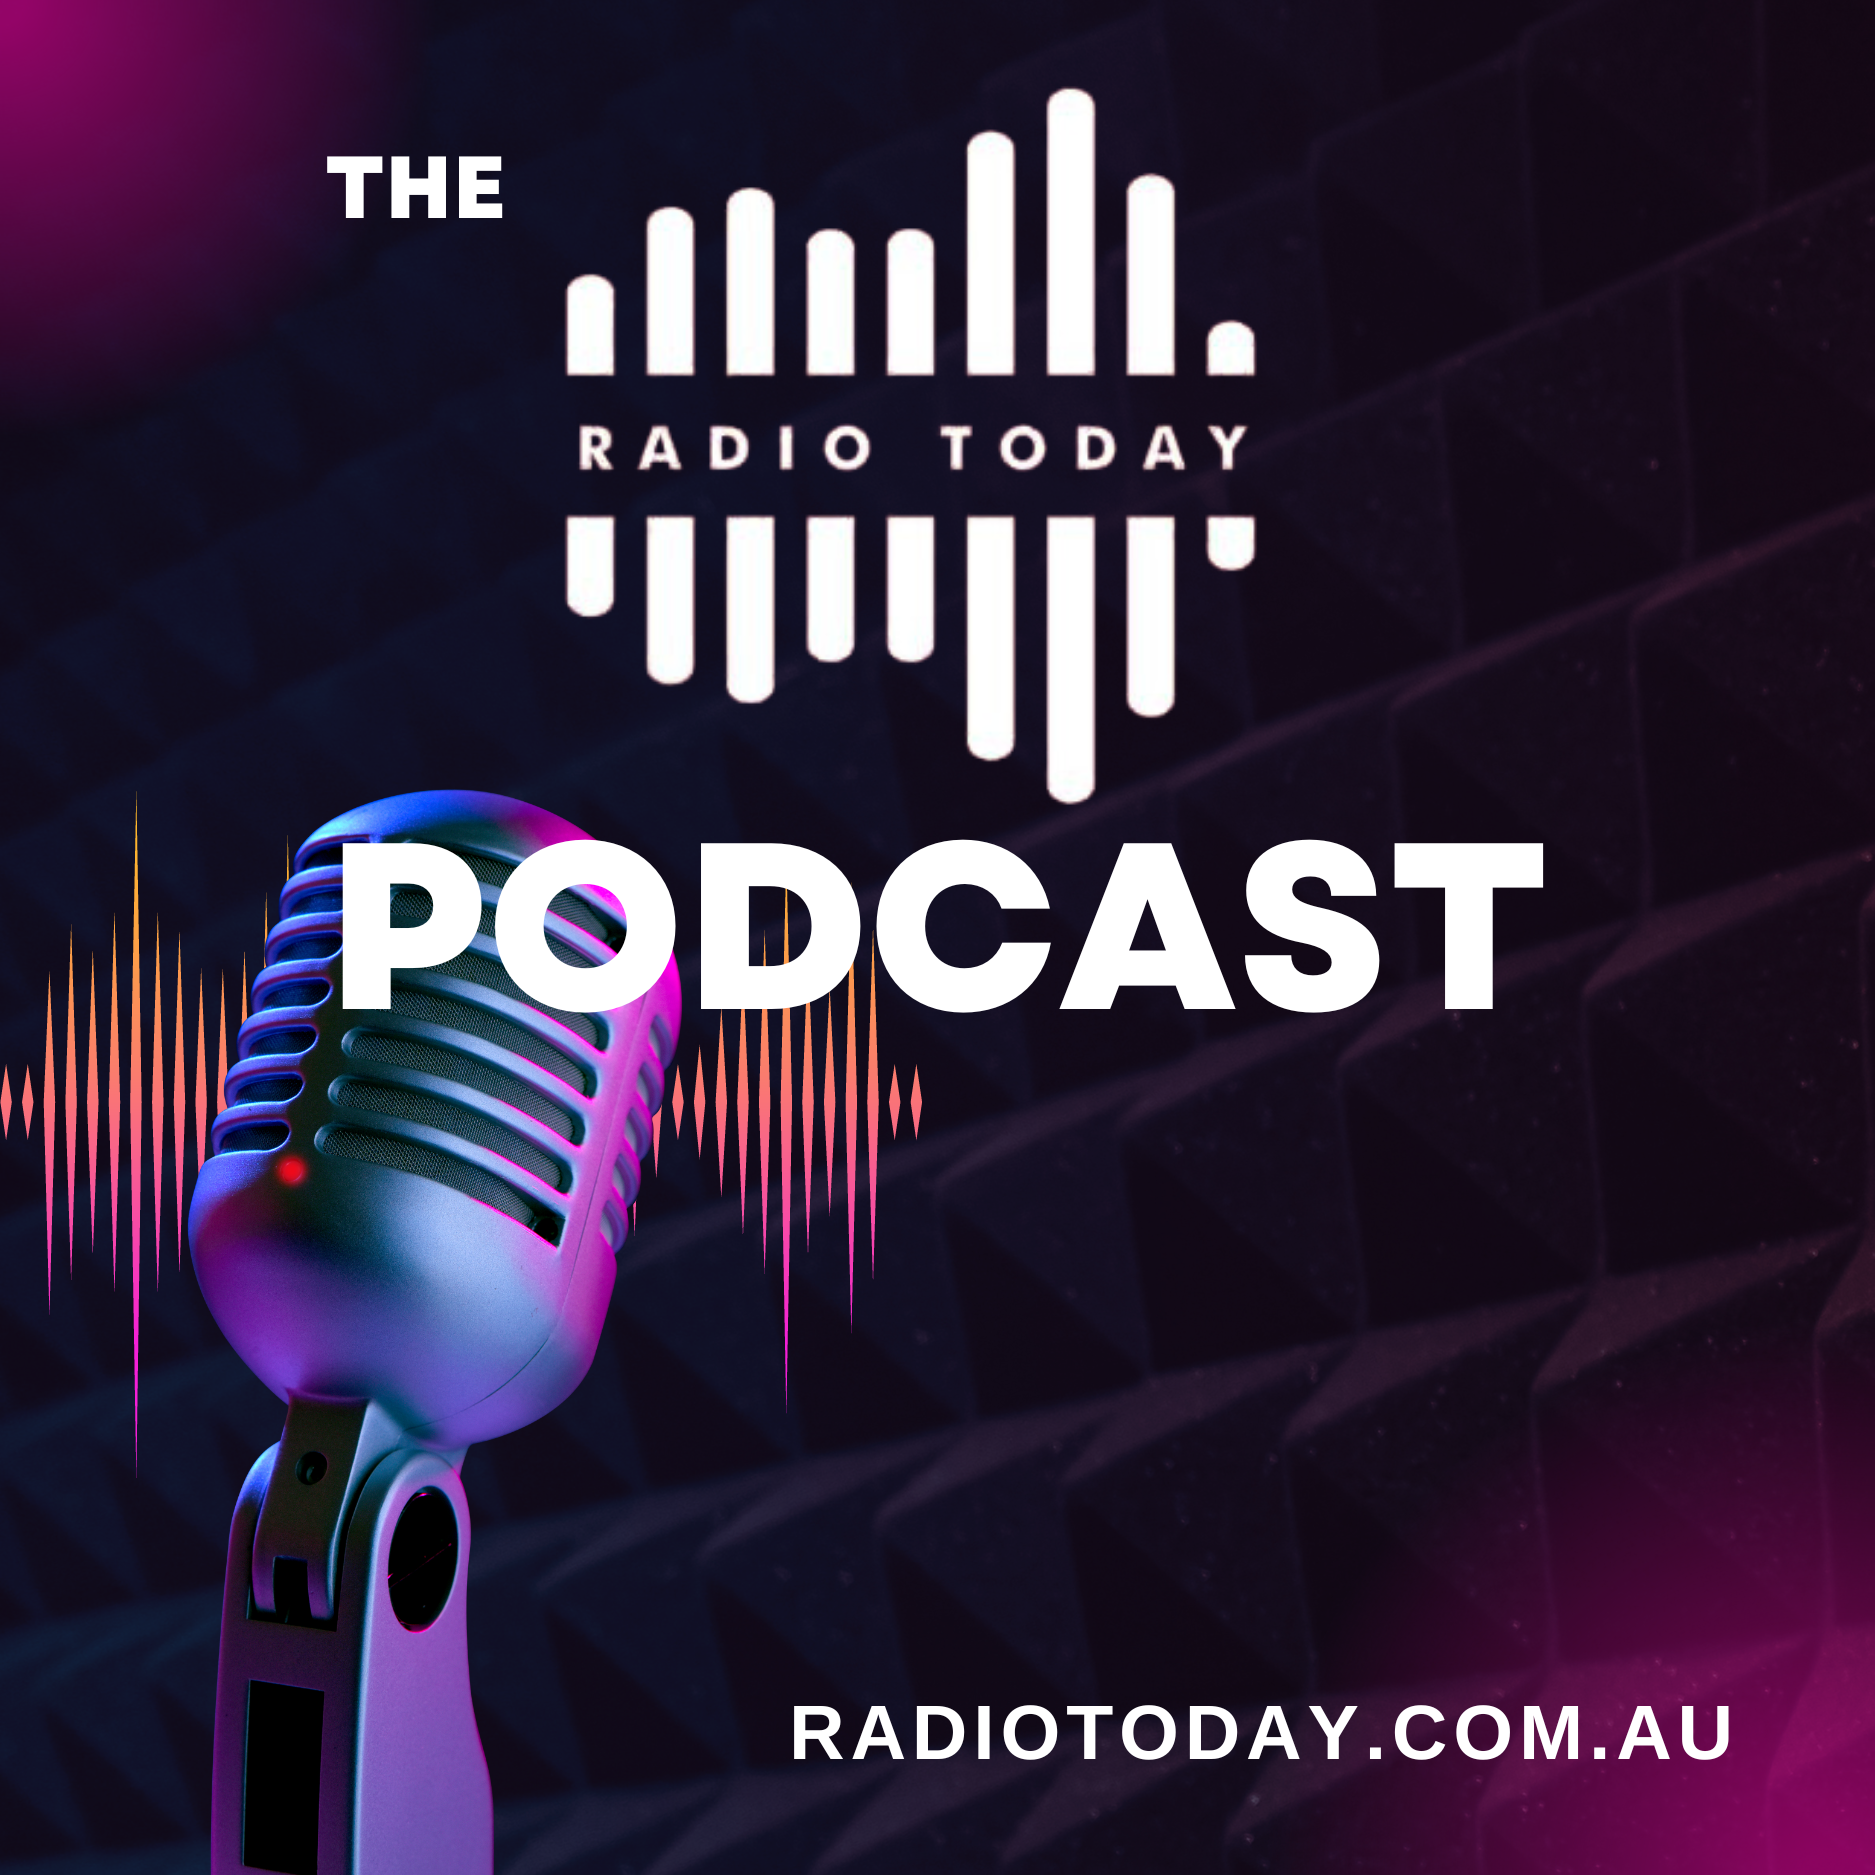 Radio Today: Kyle and Jackie O, Christian O'Connell Ink New Deals, Interview with Angela Tjeuw and Tristan Black from I'm at a Crossroad" + more!